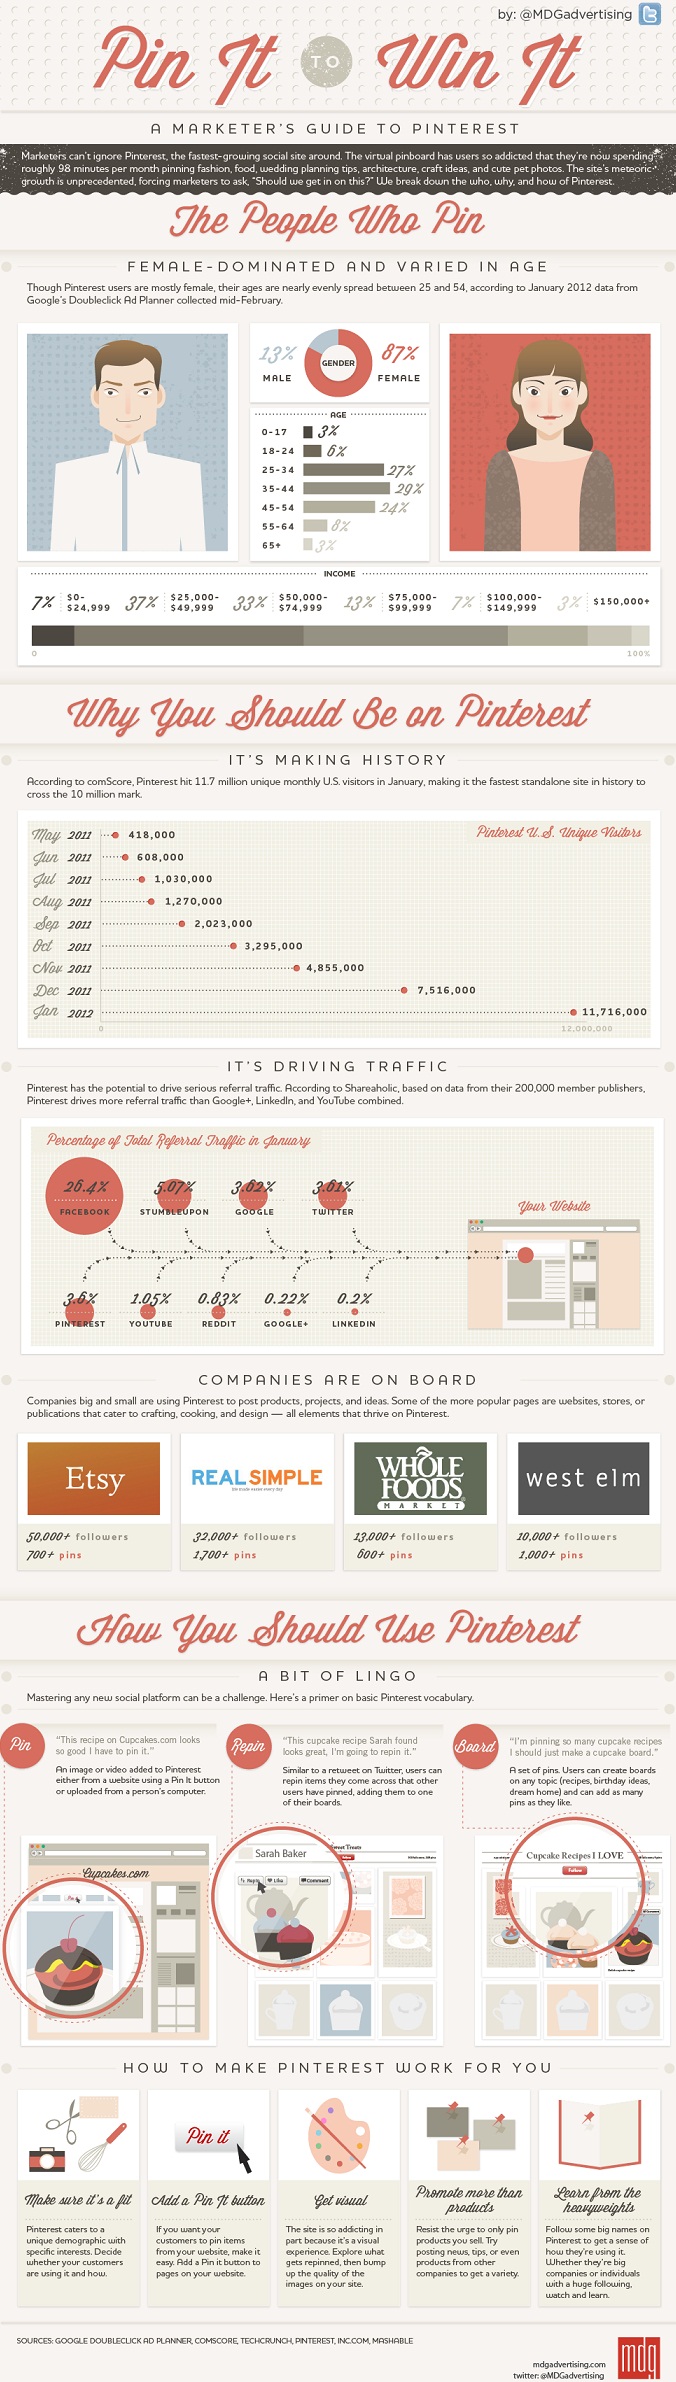 Pinterest Overview Infographic